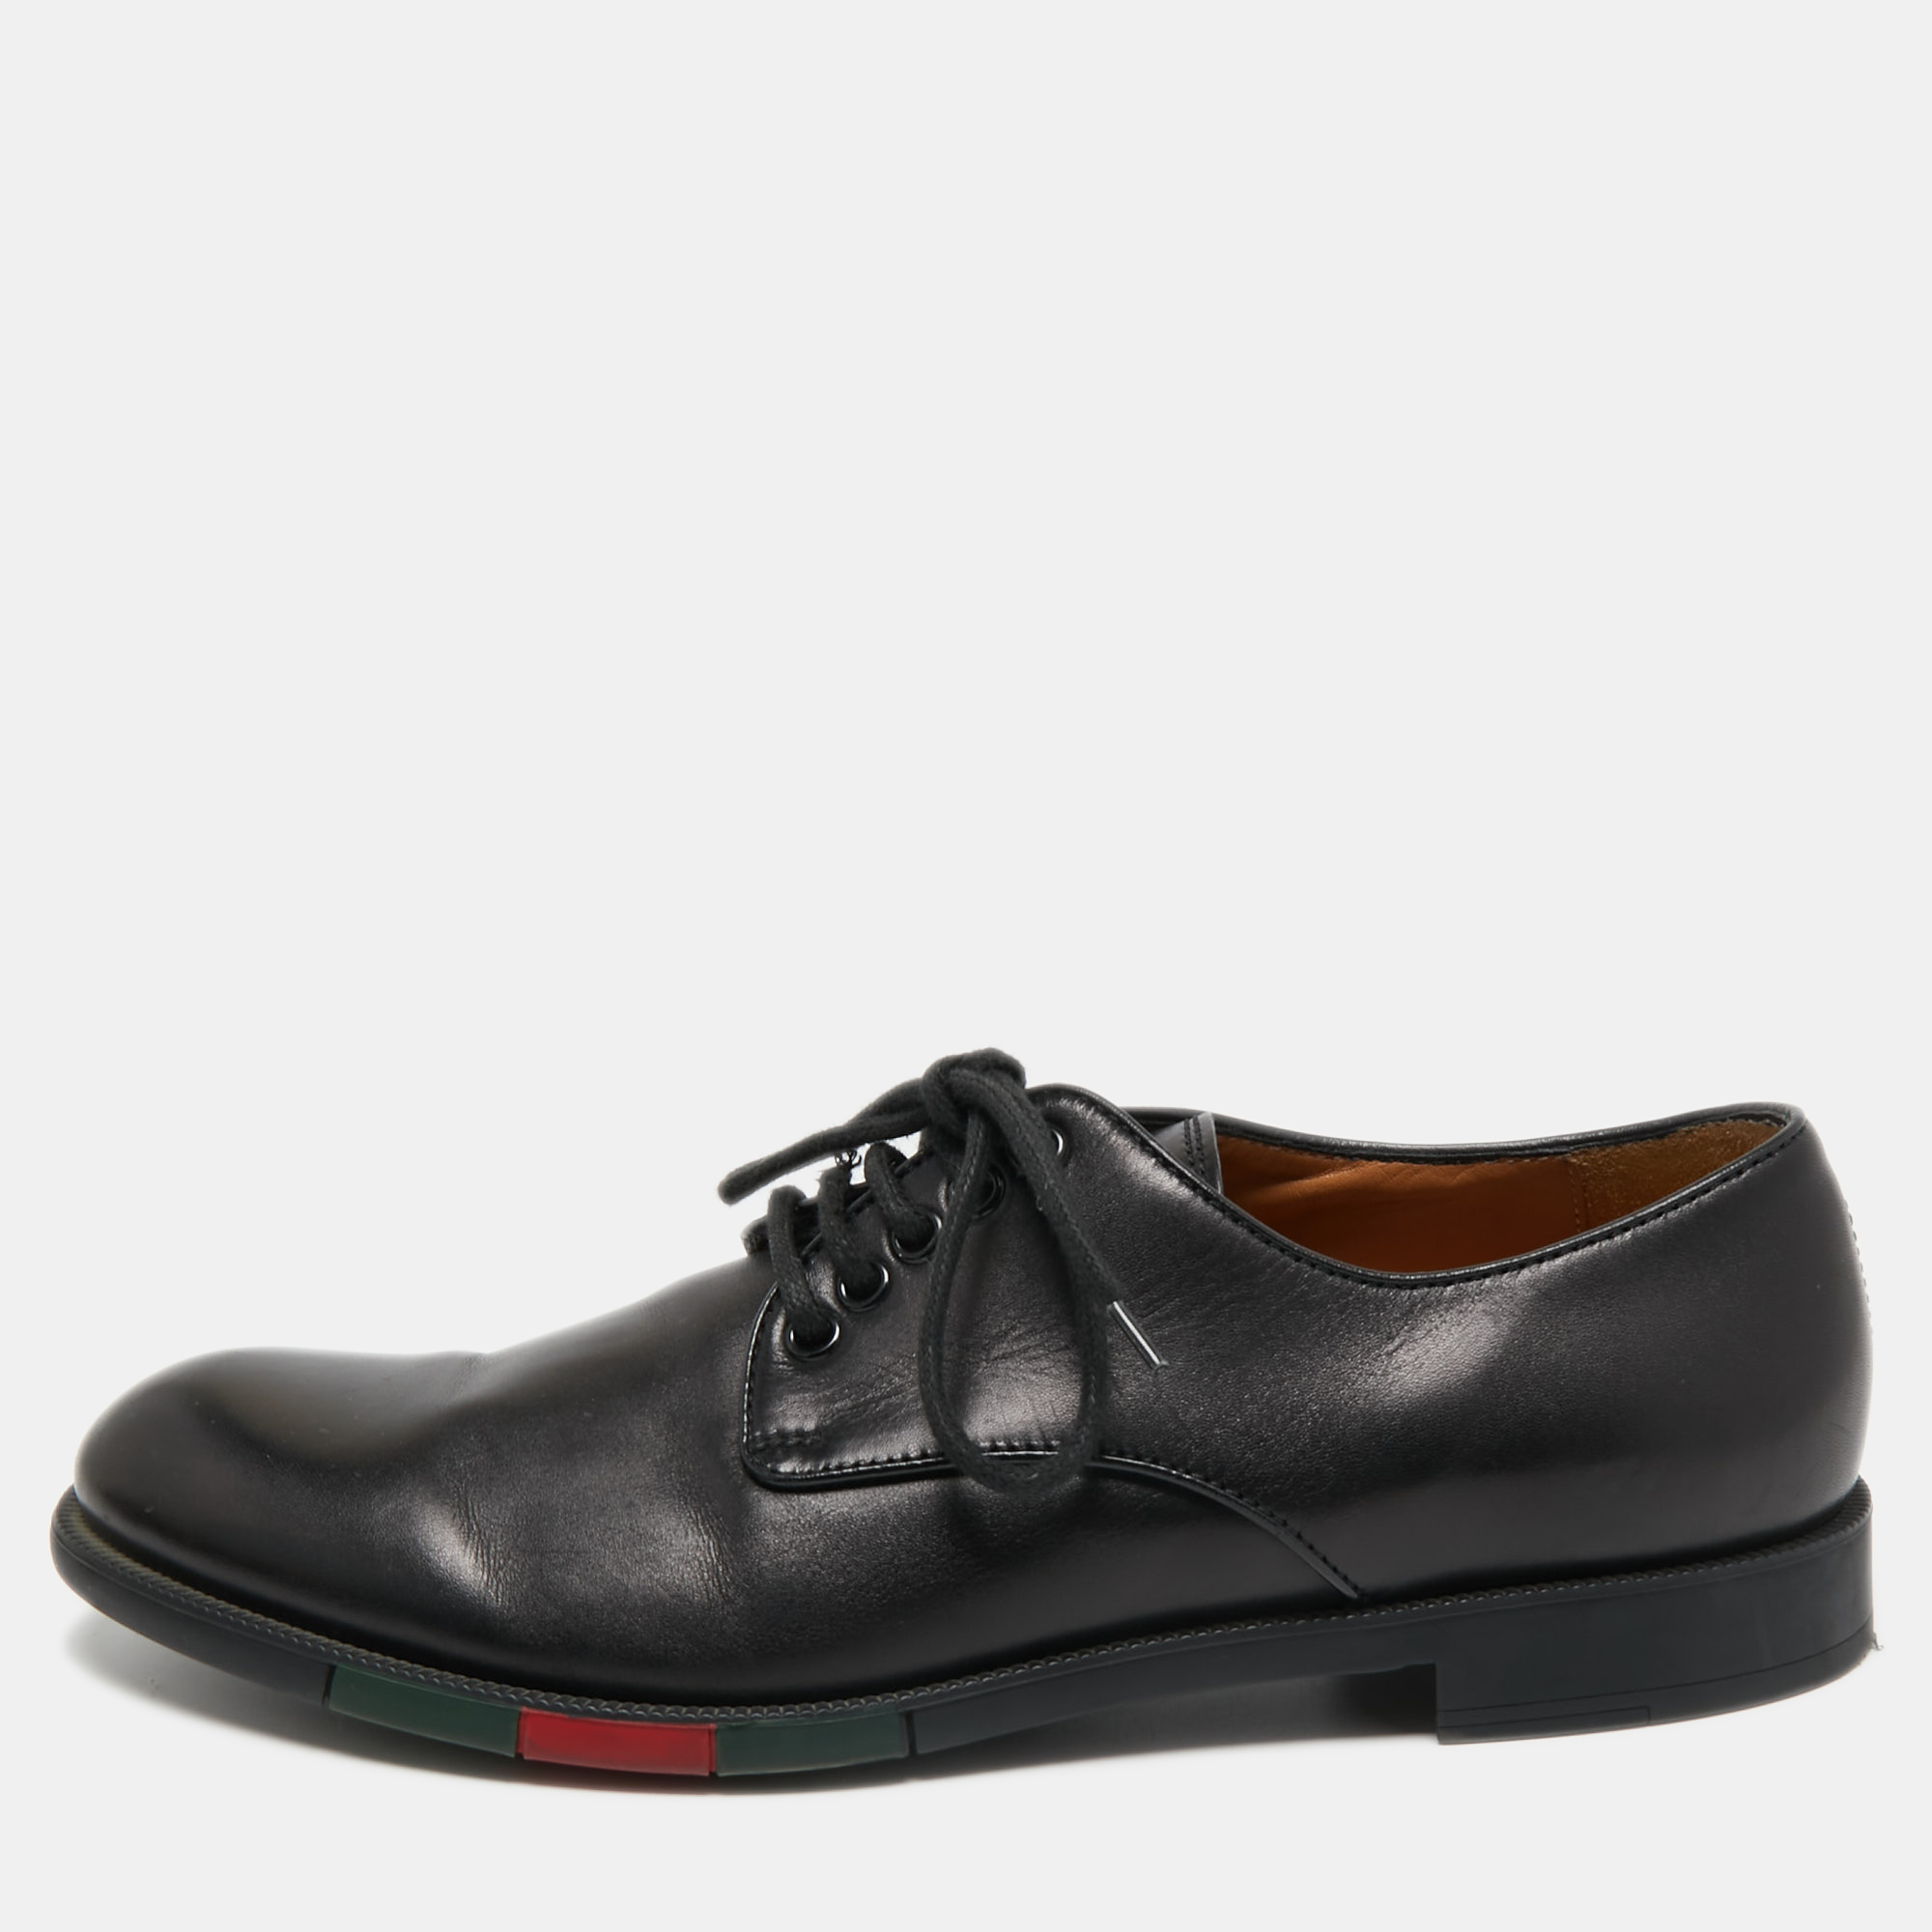 Pre-owned Gucci Black Leather Lace Up Oxfords Size 41.5